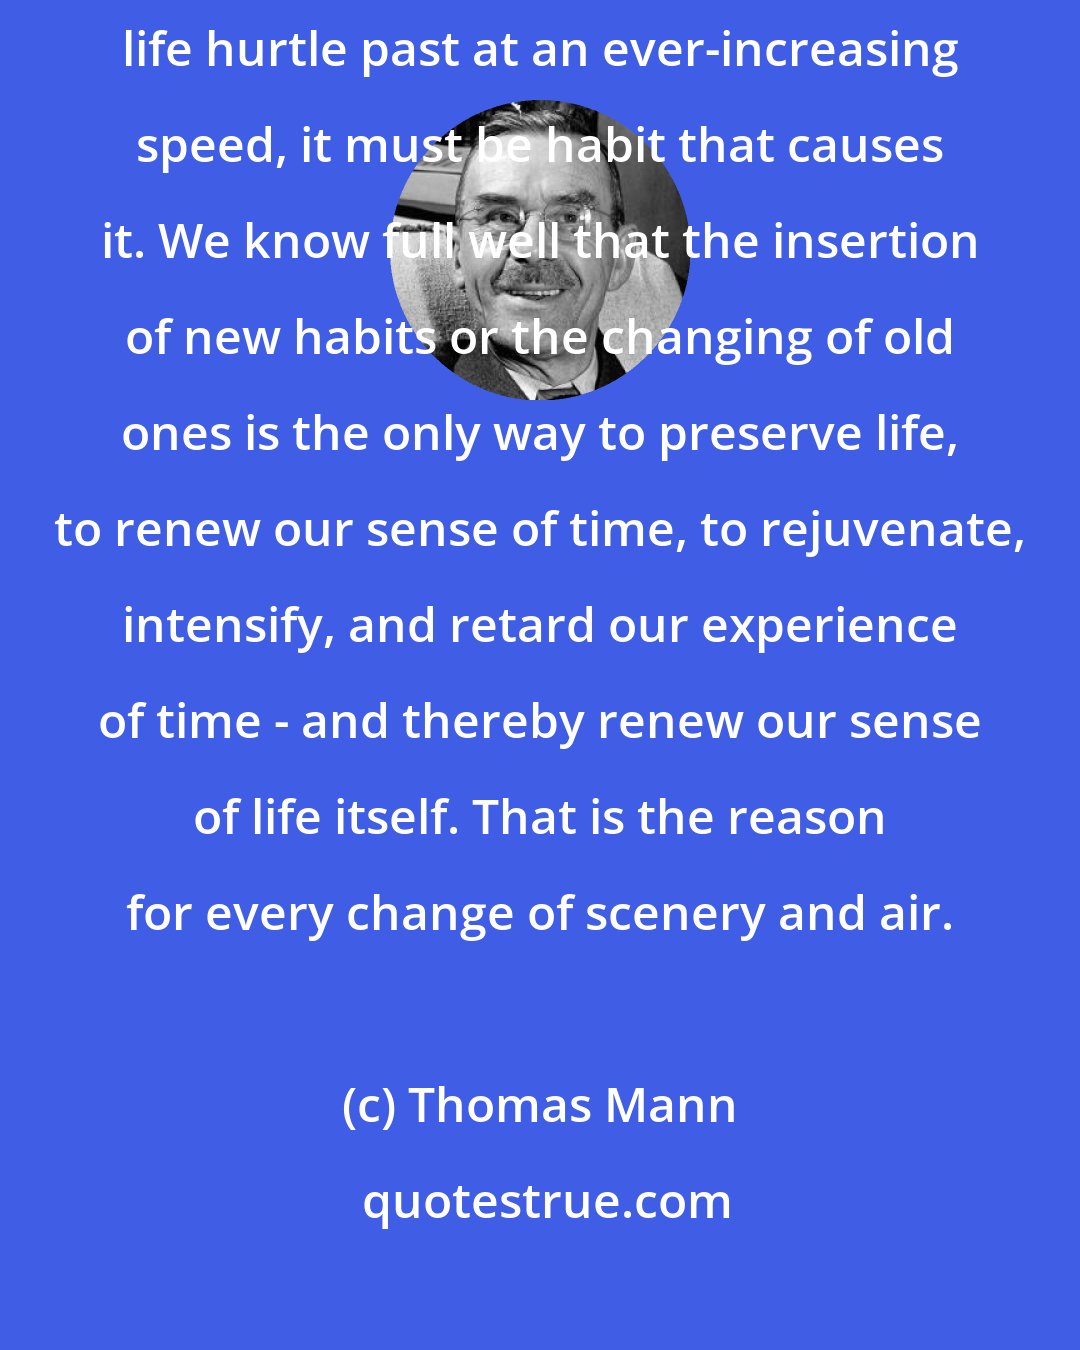 Thomas Mann: If the years of youth are experienced slowly, while the later years of life hurtle past at an ever-increasing speed, it must be habit that causes it. We know full well that the insertion of new habits or the changing of old ones is the only way to preserve life, to renew our sense of time, to rejuvenate, intensify, and retard our experience of time - and thereby renew our sense of life itself. That is the reason for every change of scenery and air.